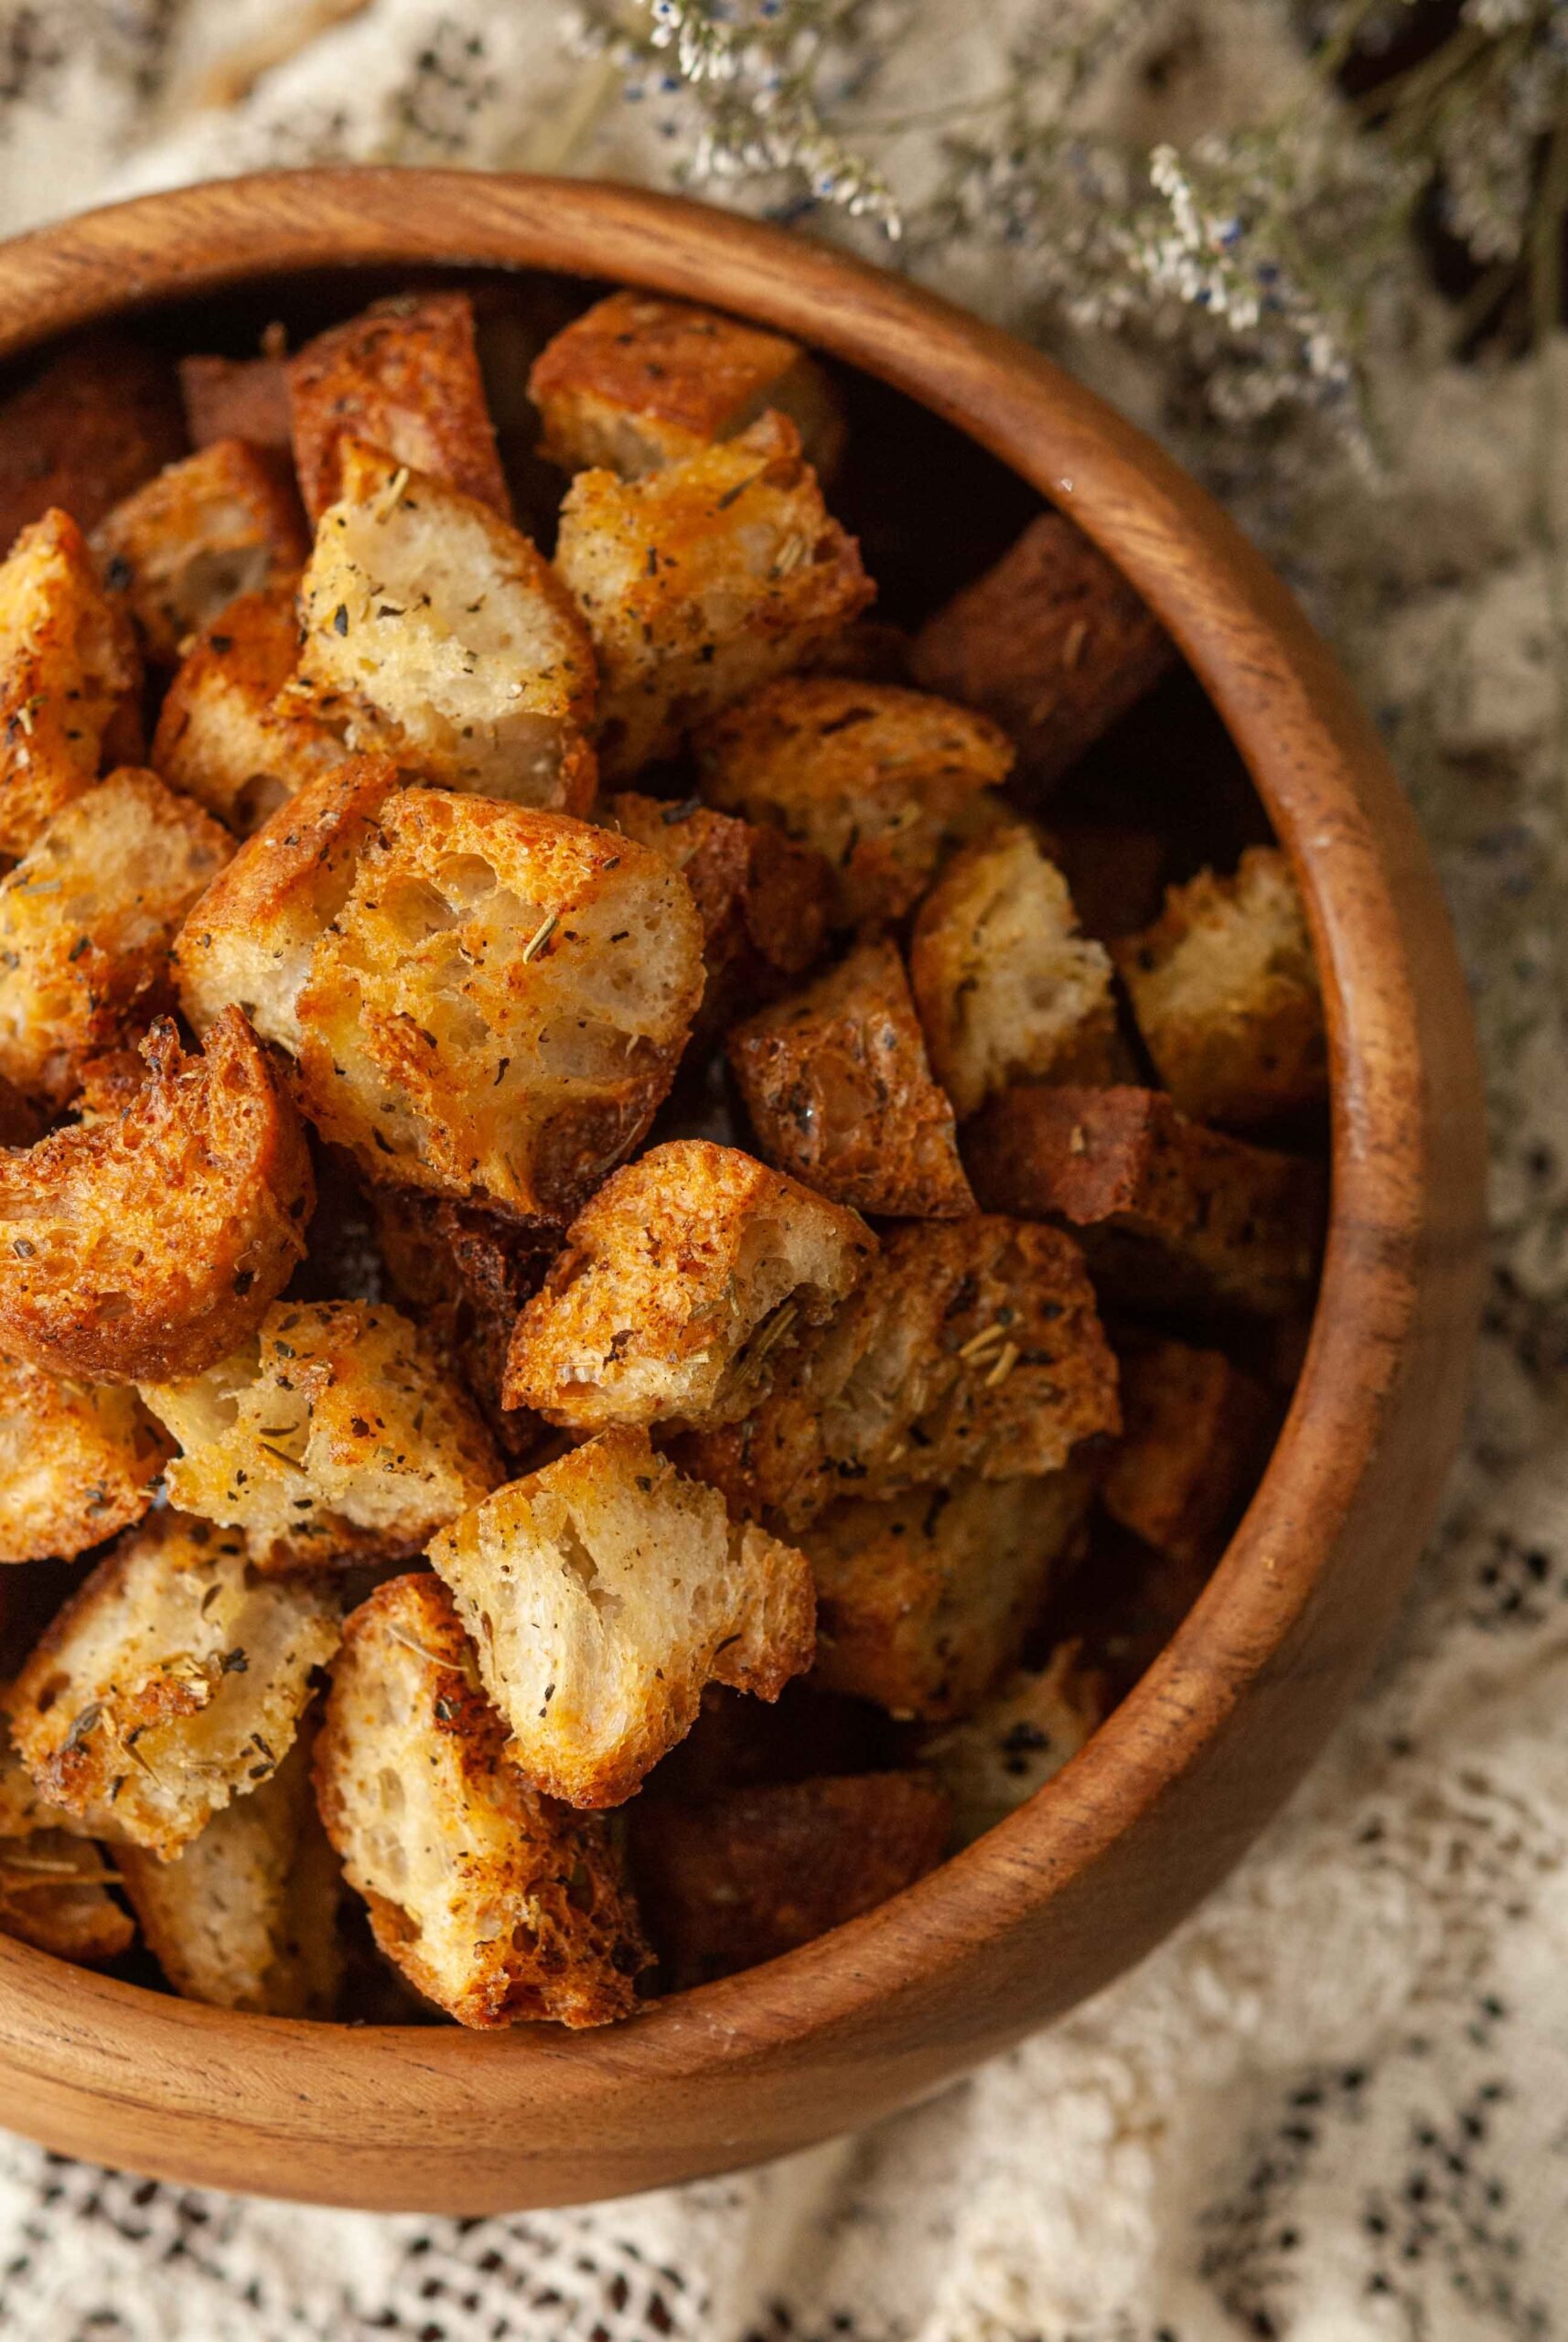 Croutons in a wooden bowl on a lace table cloth.